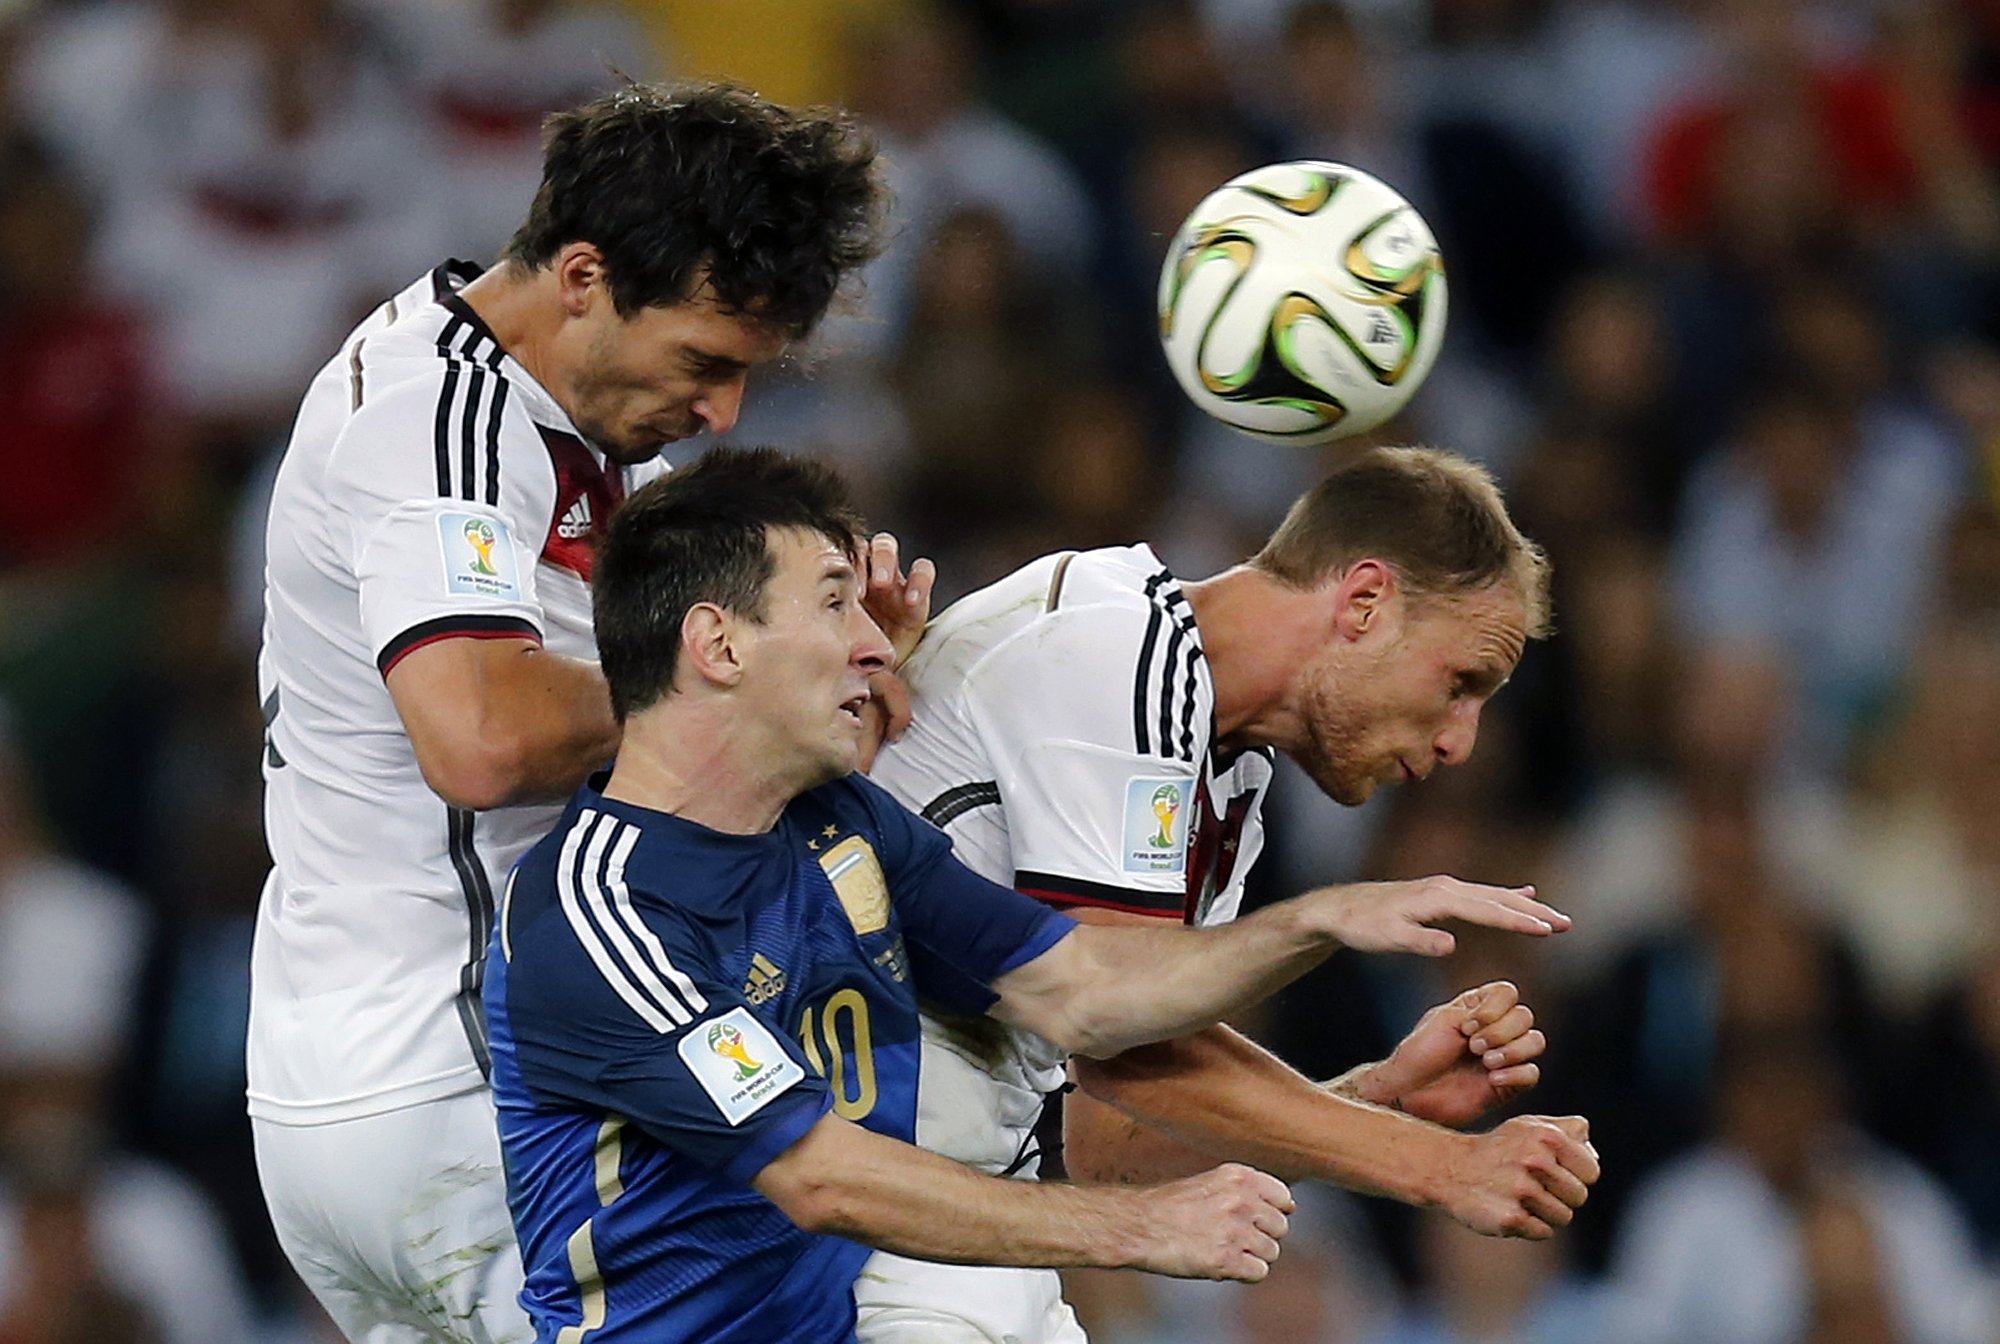 Lionel Messi was mostly crowded out by Germany's defence. Photo: AP